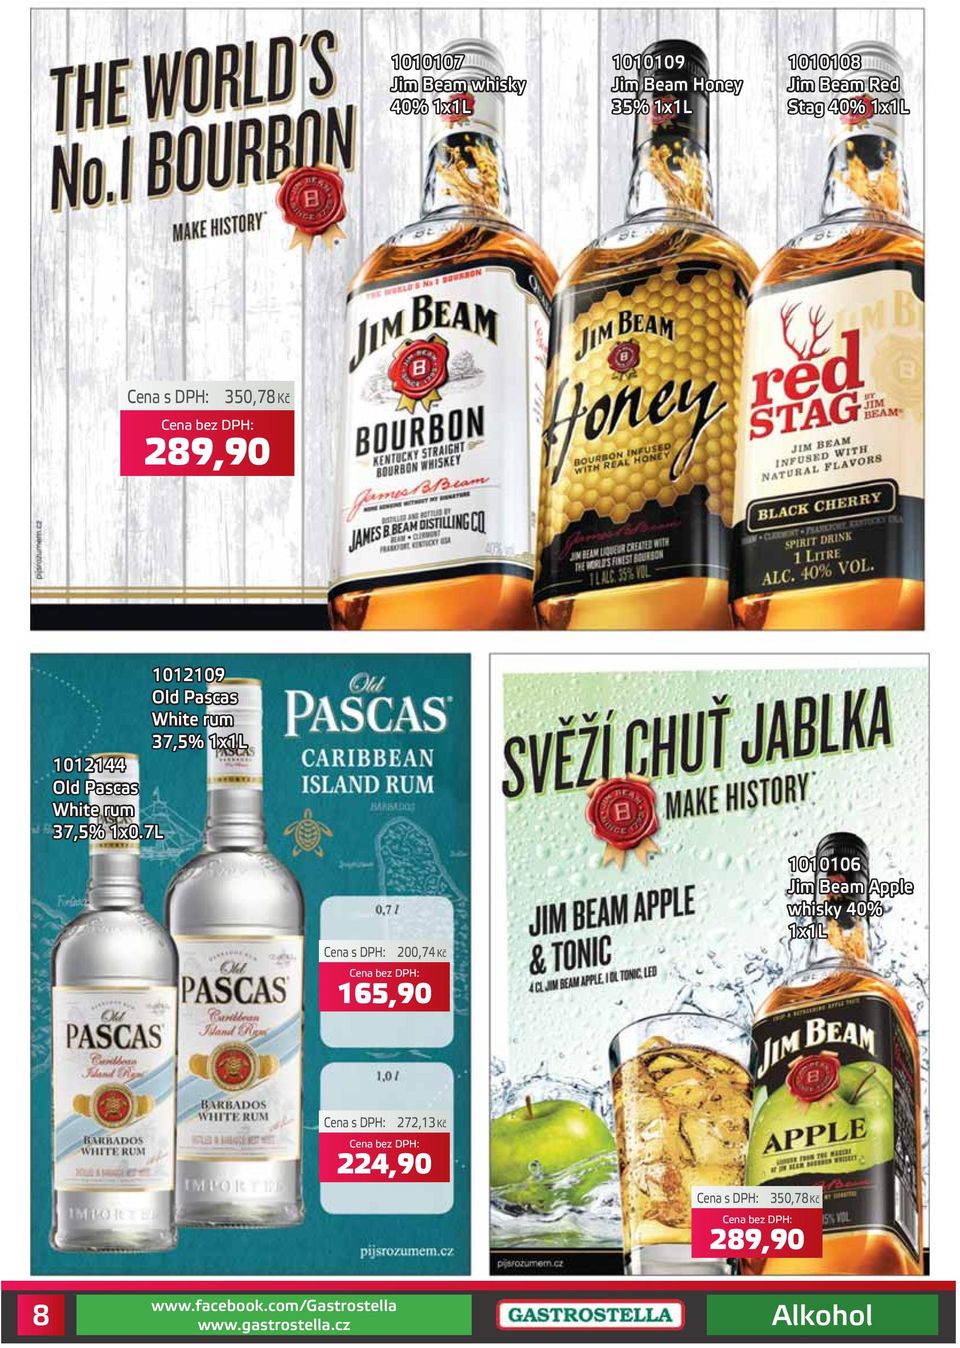 rum 37,5% 1012144 Old Pascas White rum 37,5% 1x0.